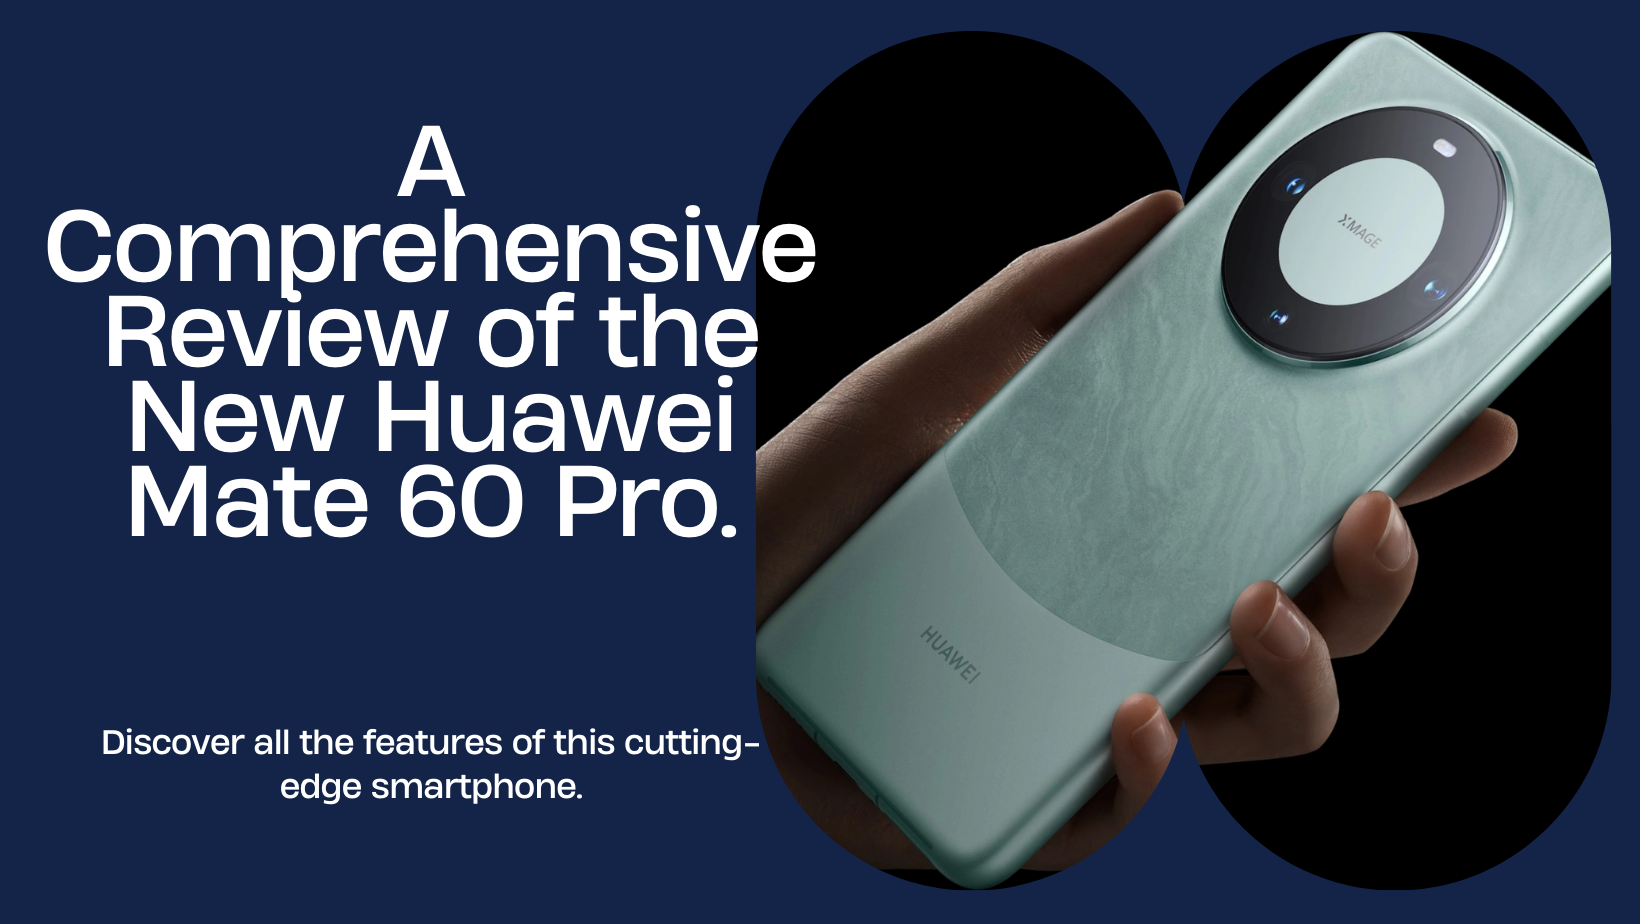 Huawei Mate 60 Pro is One of the Best Phones That You Can't Buy